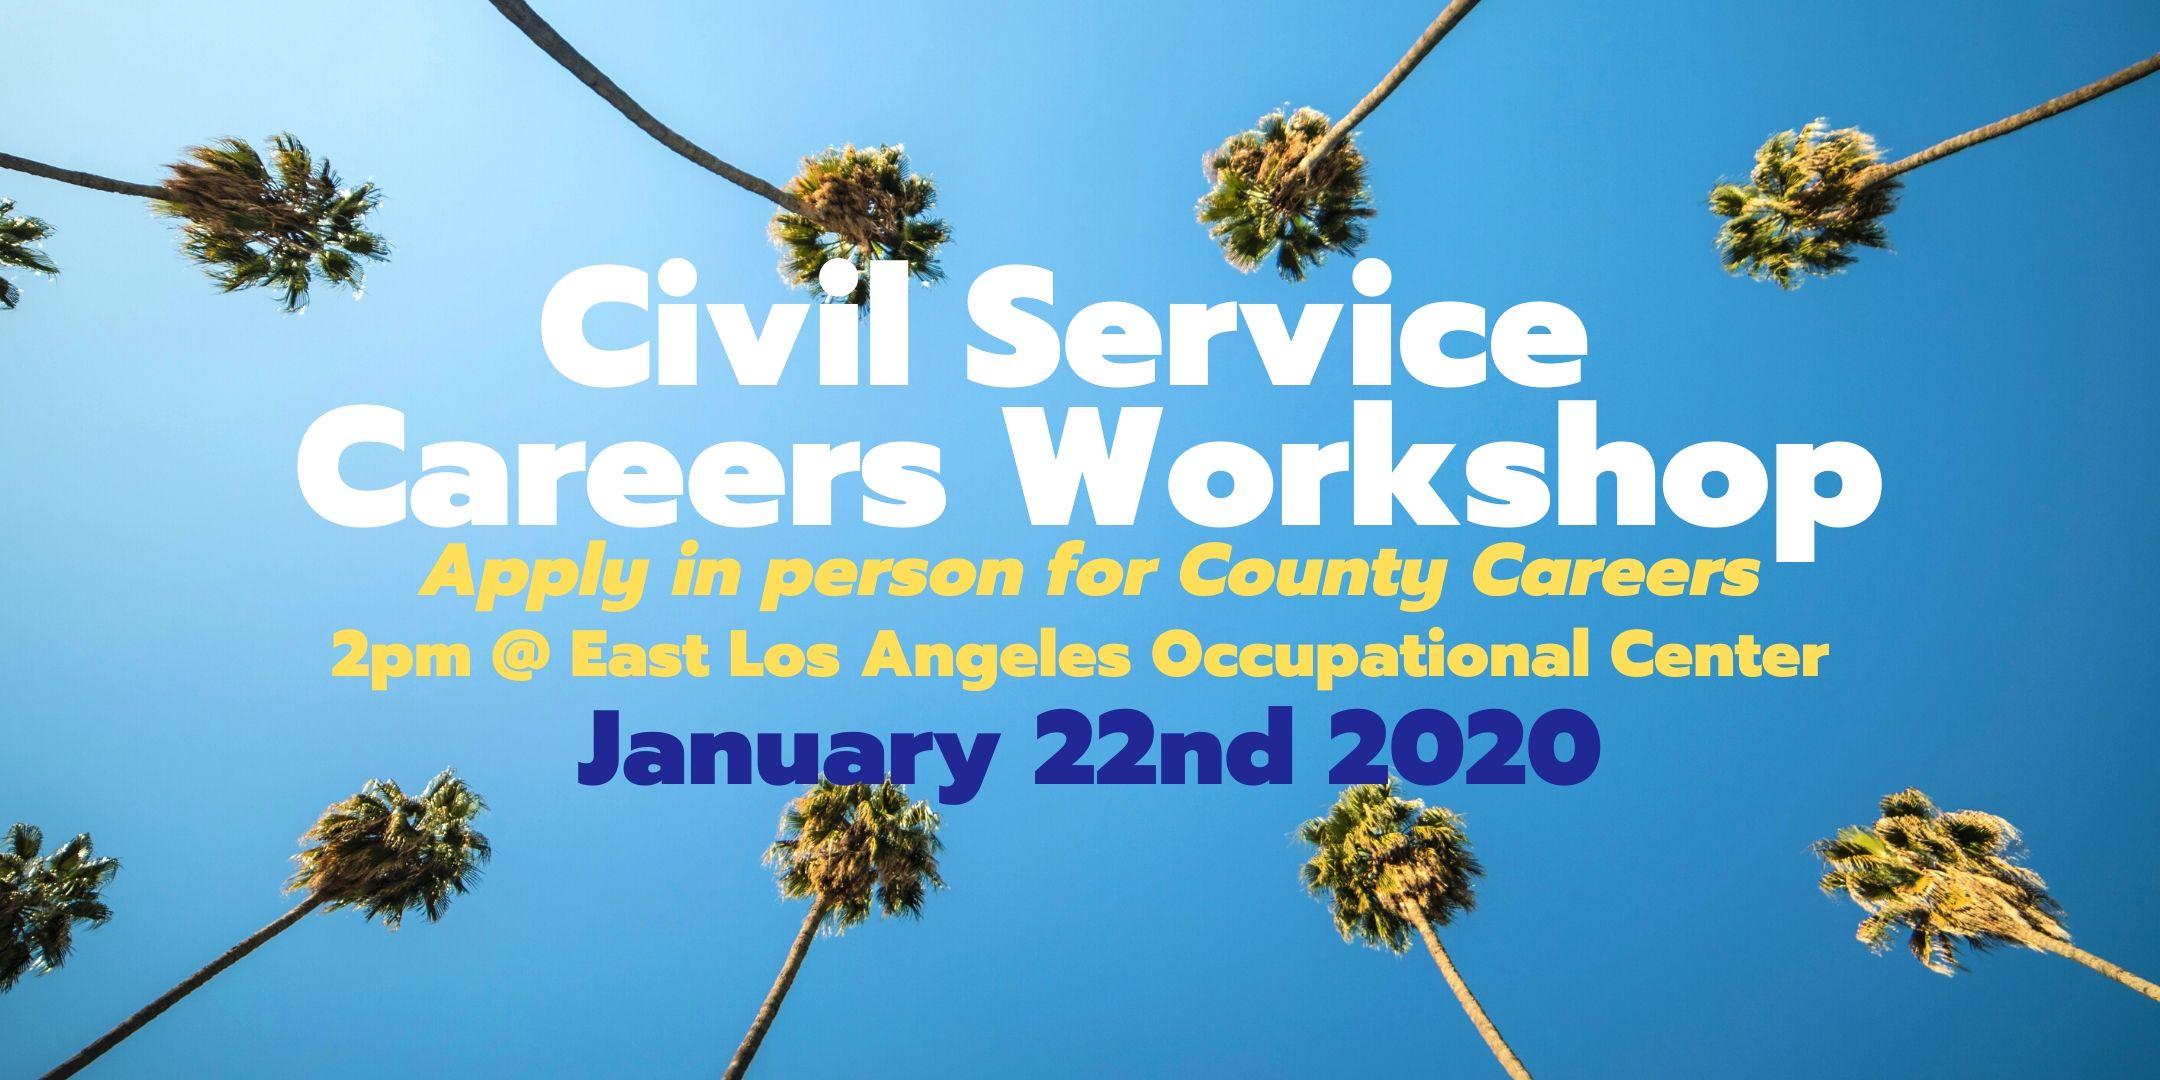 L.A County Civil Service Careers Workshop #4 January 22nd 2020